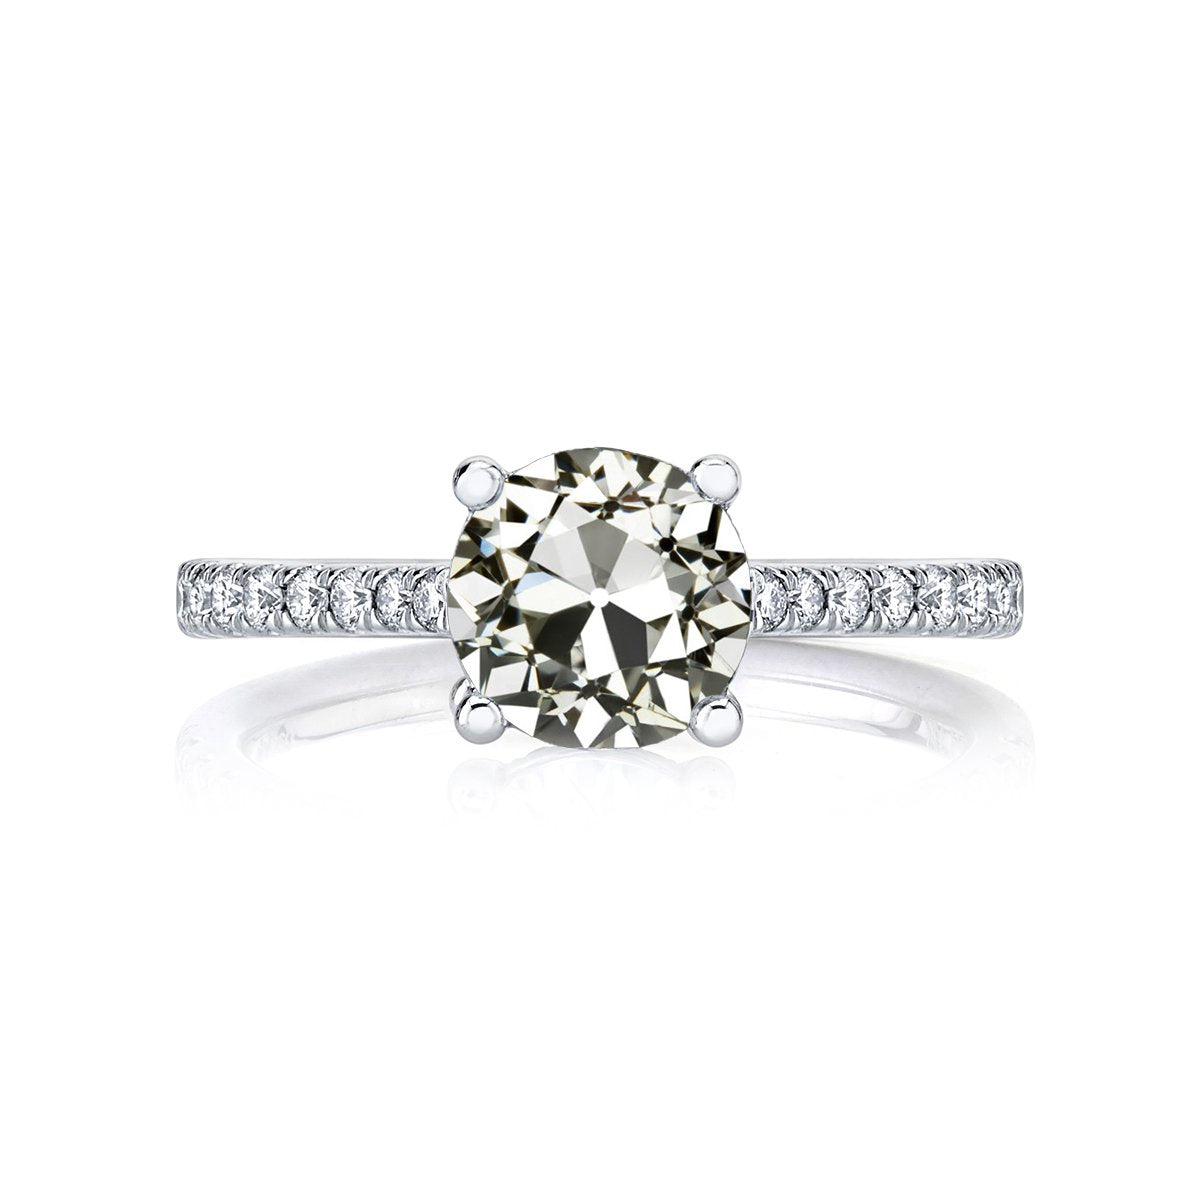 Lady's Anniversary Ring Genuine Round Old Cut Diamond 4 Prong Set 4 Carats